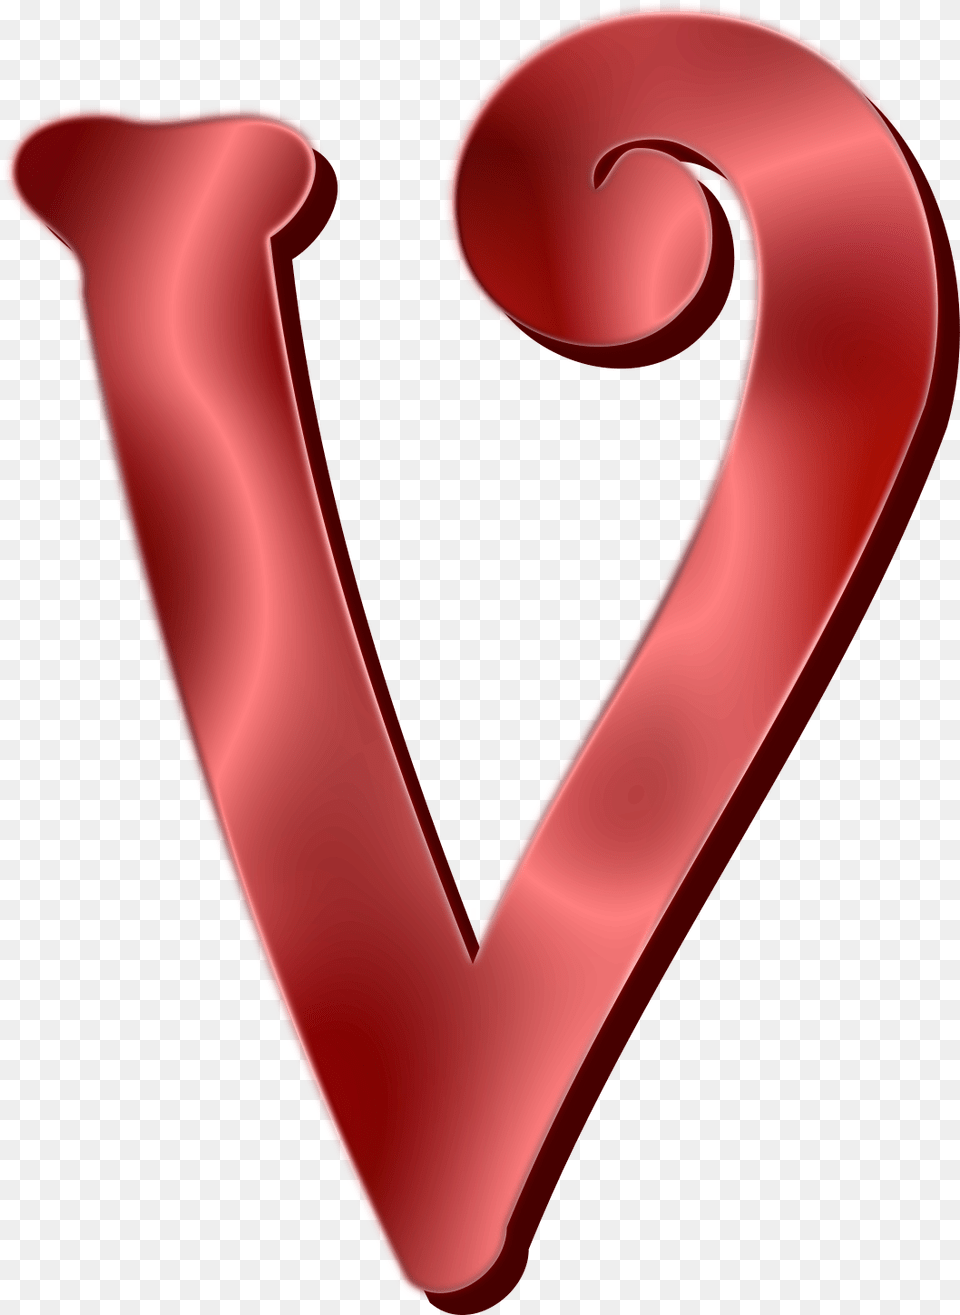 This Icons Design Of Alphabet 12 Letter V, Heart, Smoke Pipe Png Image